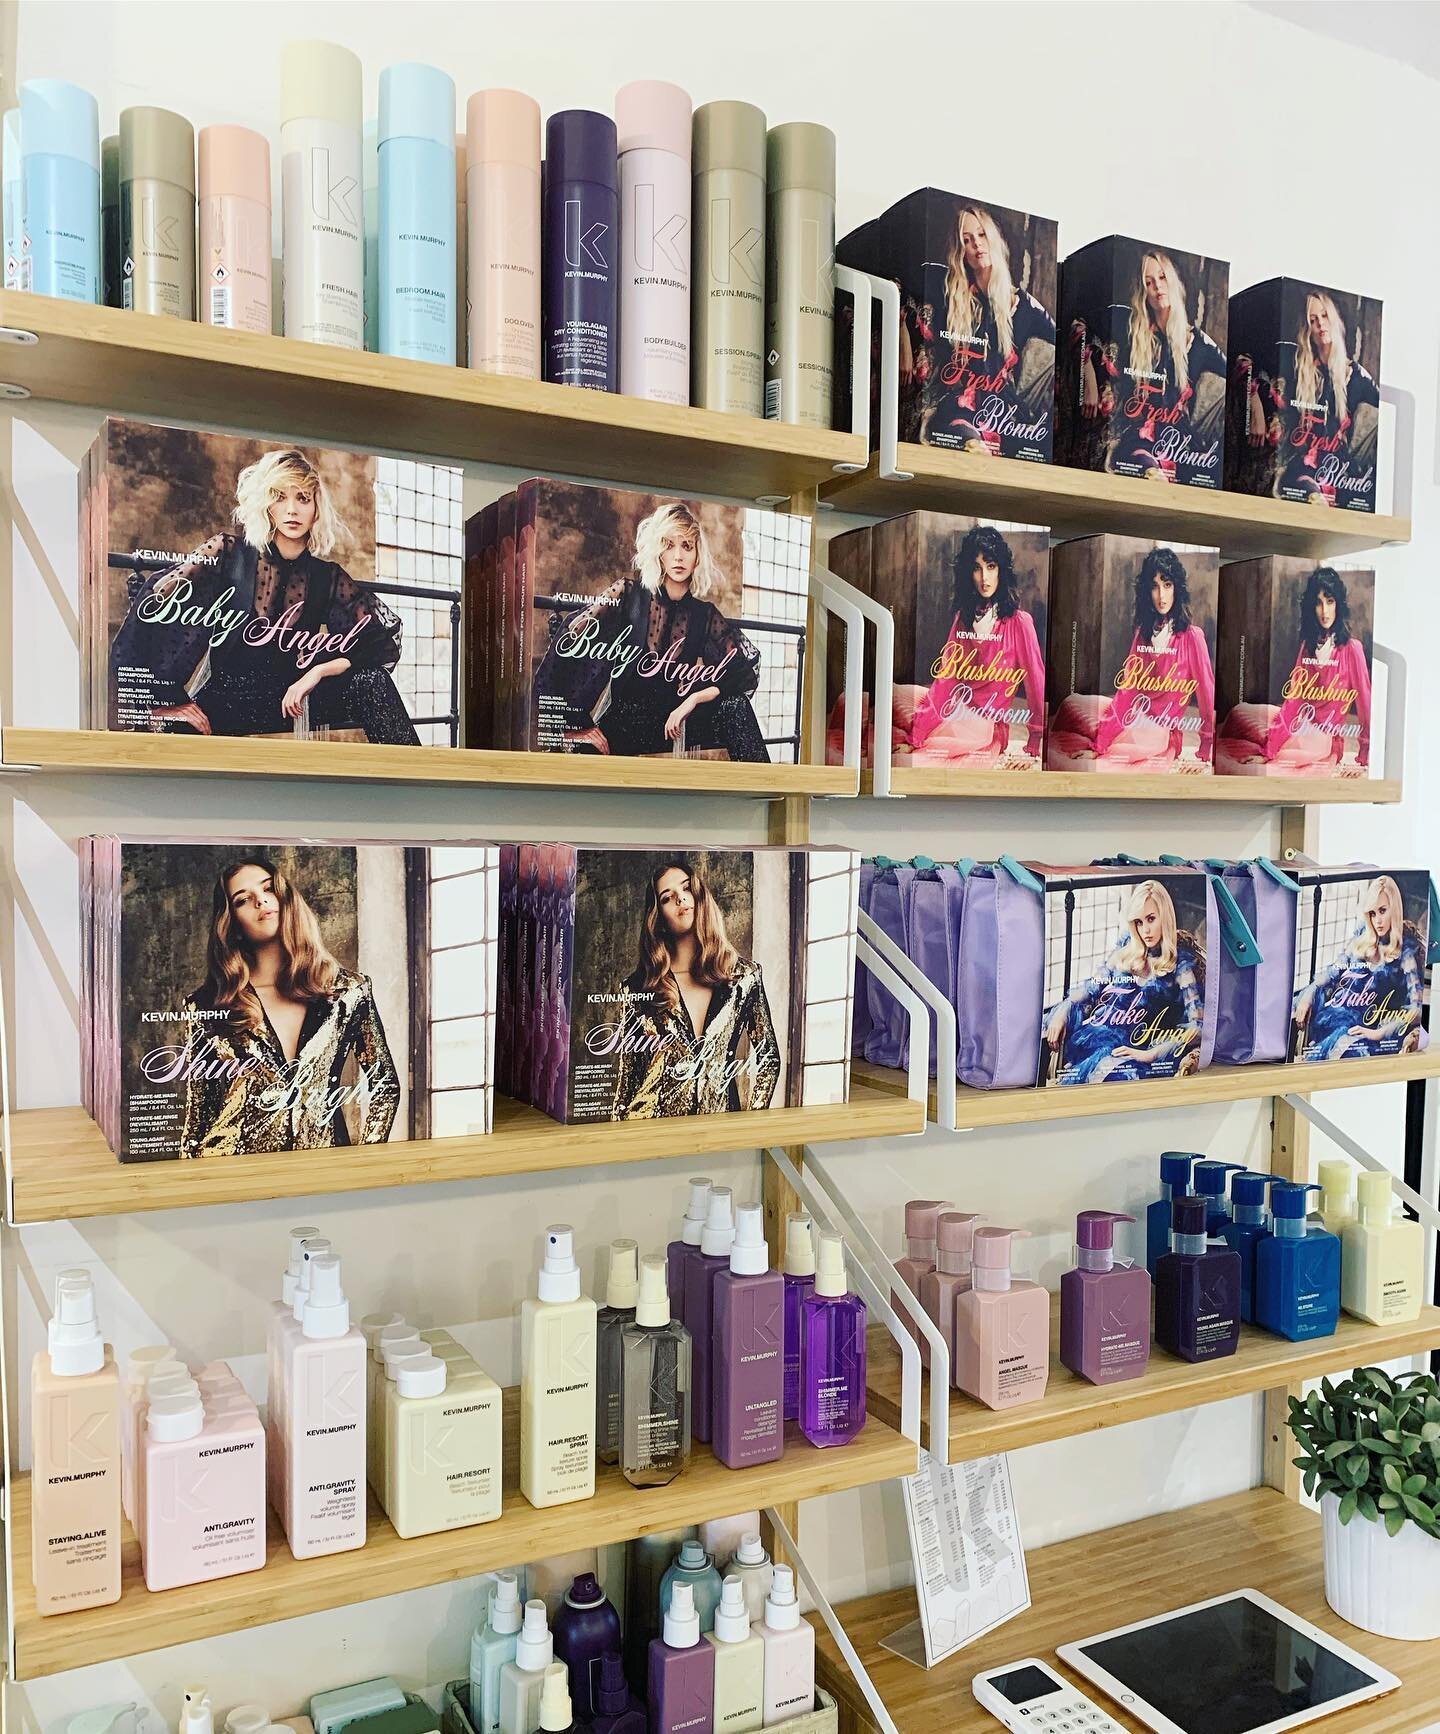 R E P O S T - To our Dublin Clients &amp; Friends - Although our doors may be closing for the time being, our online shop will be open and we will be doing product drops to your door! The KEVIN.MURPHY Christmas sets have arrived and are live on our w